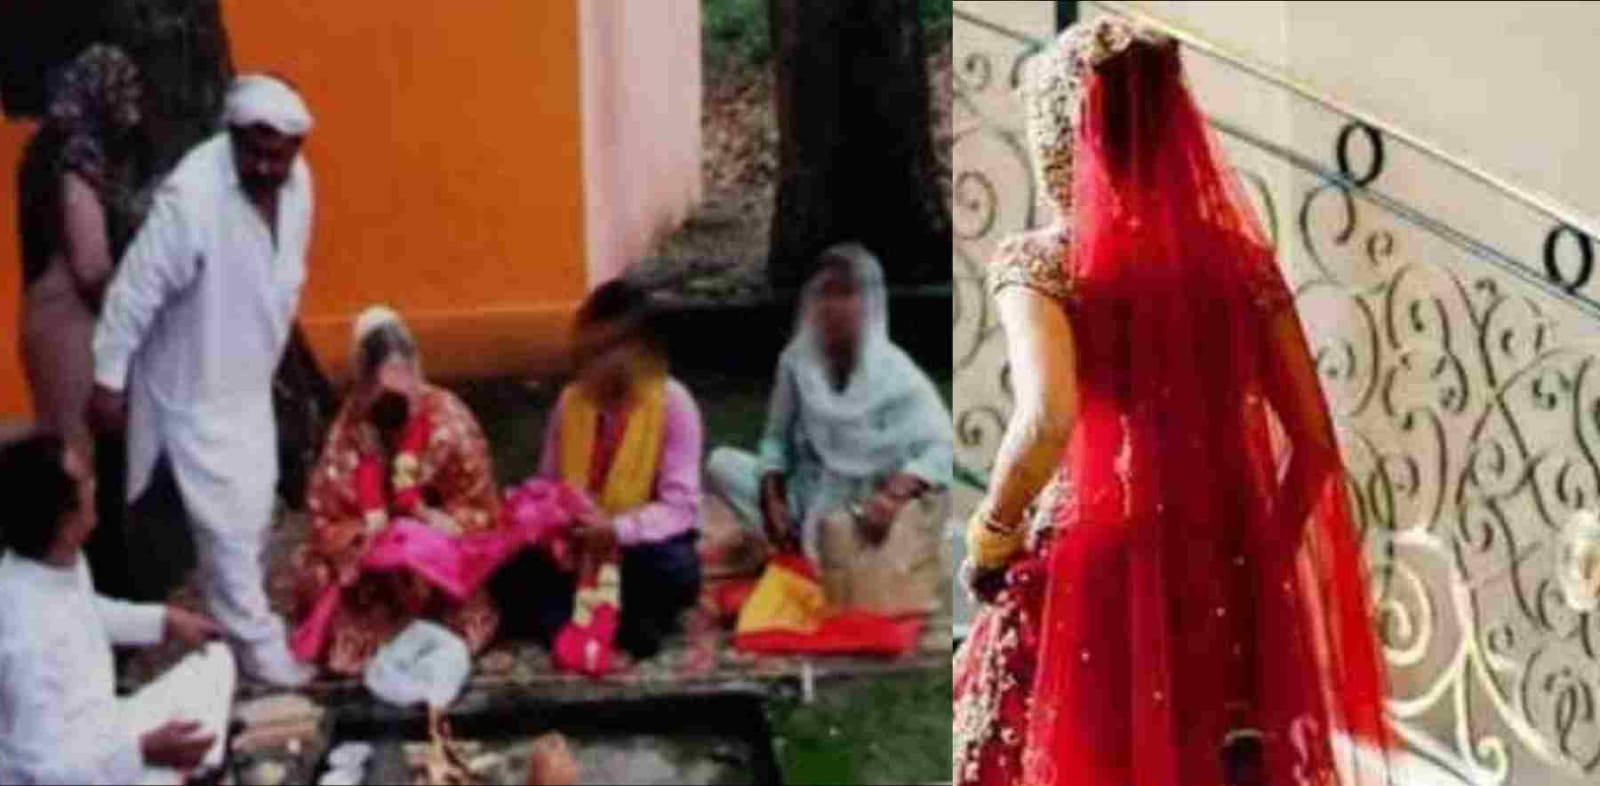 Uttarakhand News: Night marriage took place in Dehradun and in the morning the bride ran away with all the jewelery